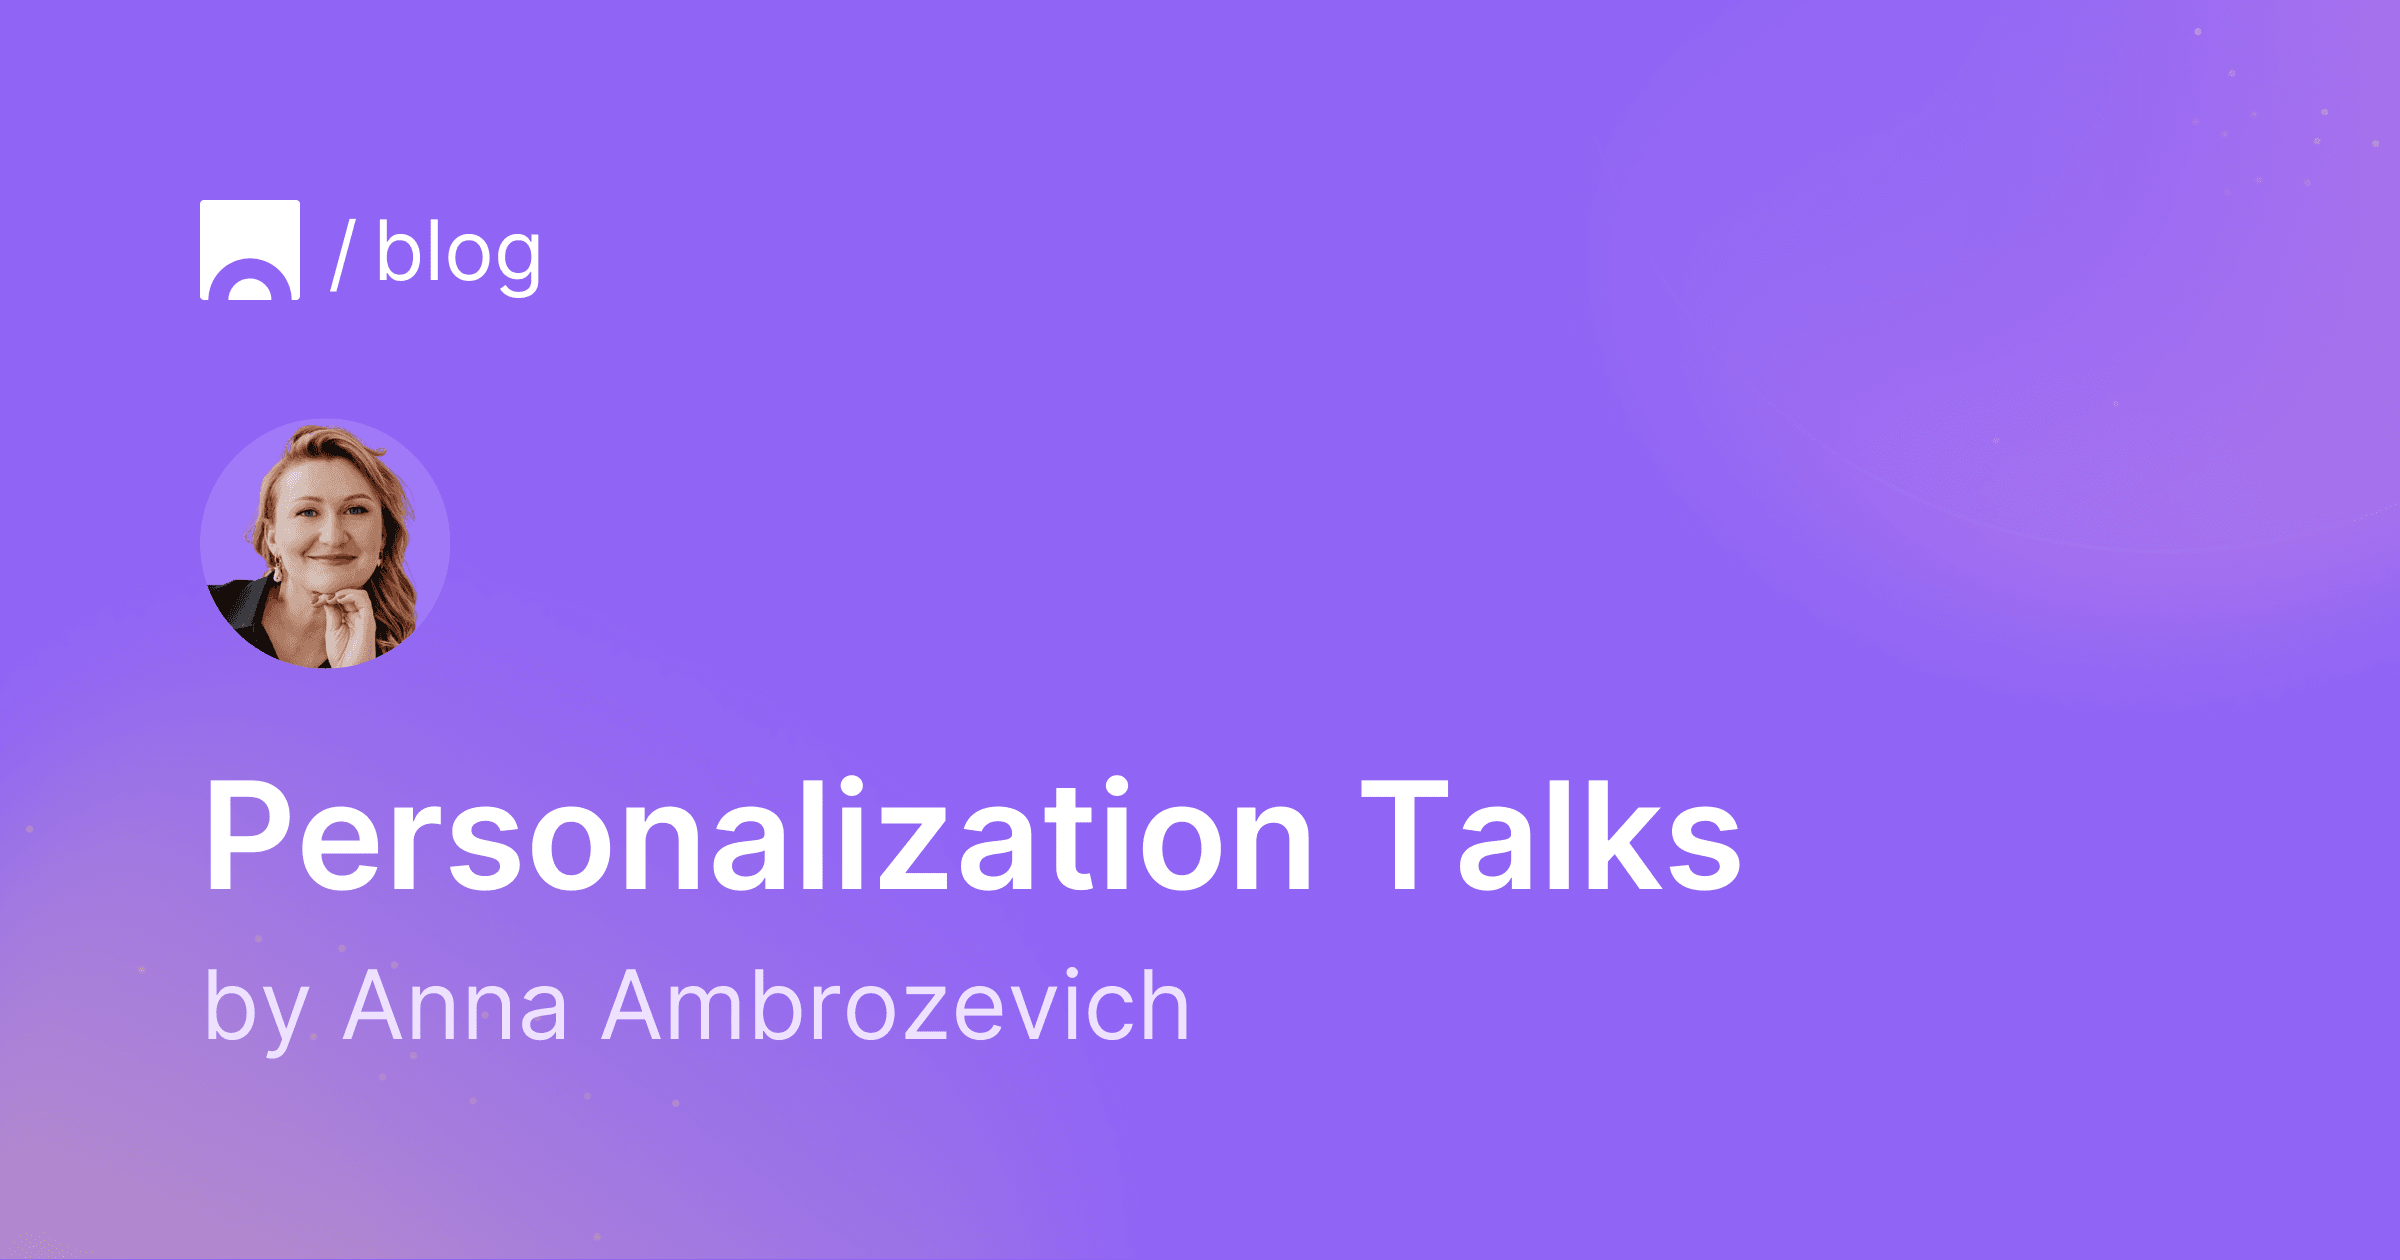 Image with purple background containing Croct's logo, Anna Ambrozevich's portrait and text that reads "Personalization Talks by Anna Ambrozevich"